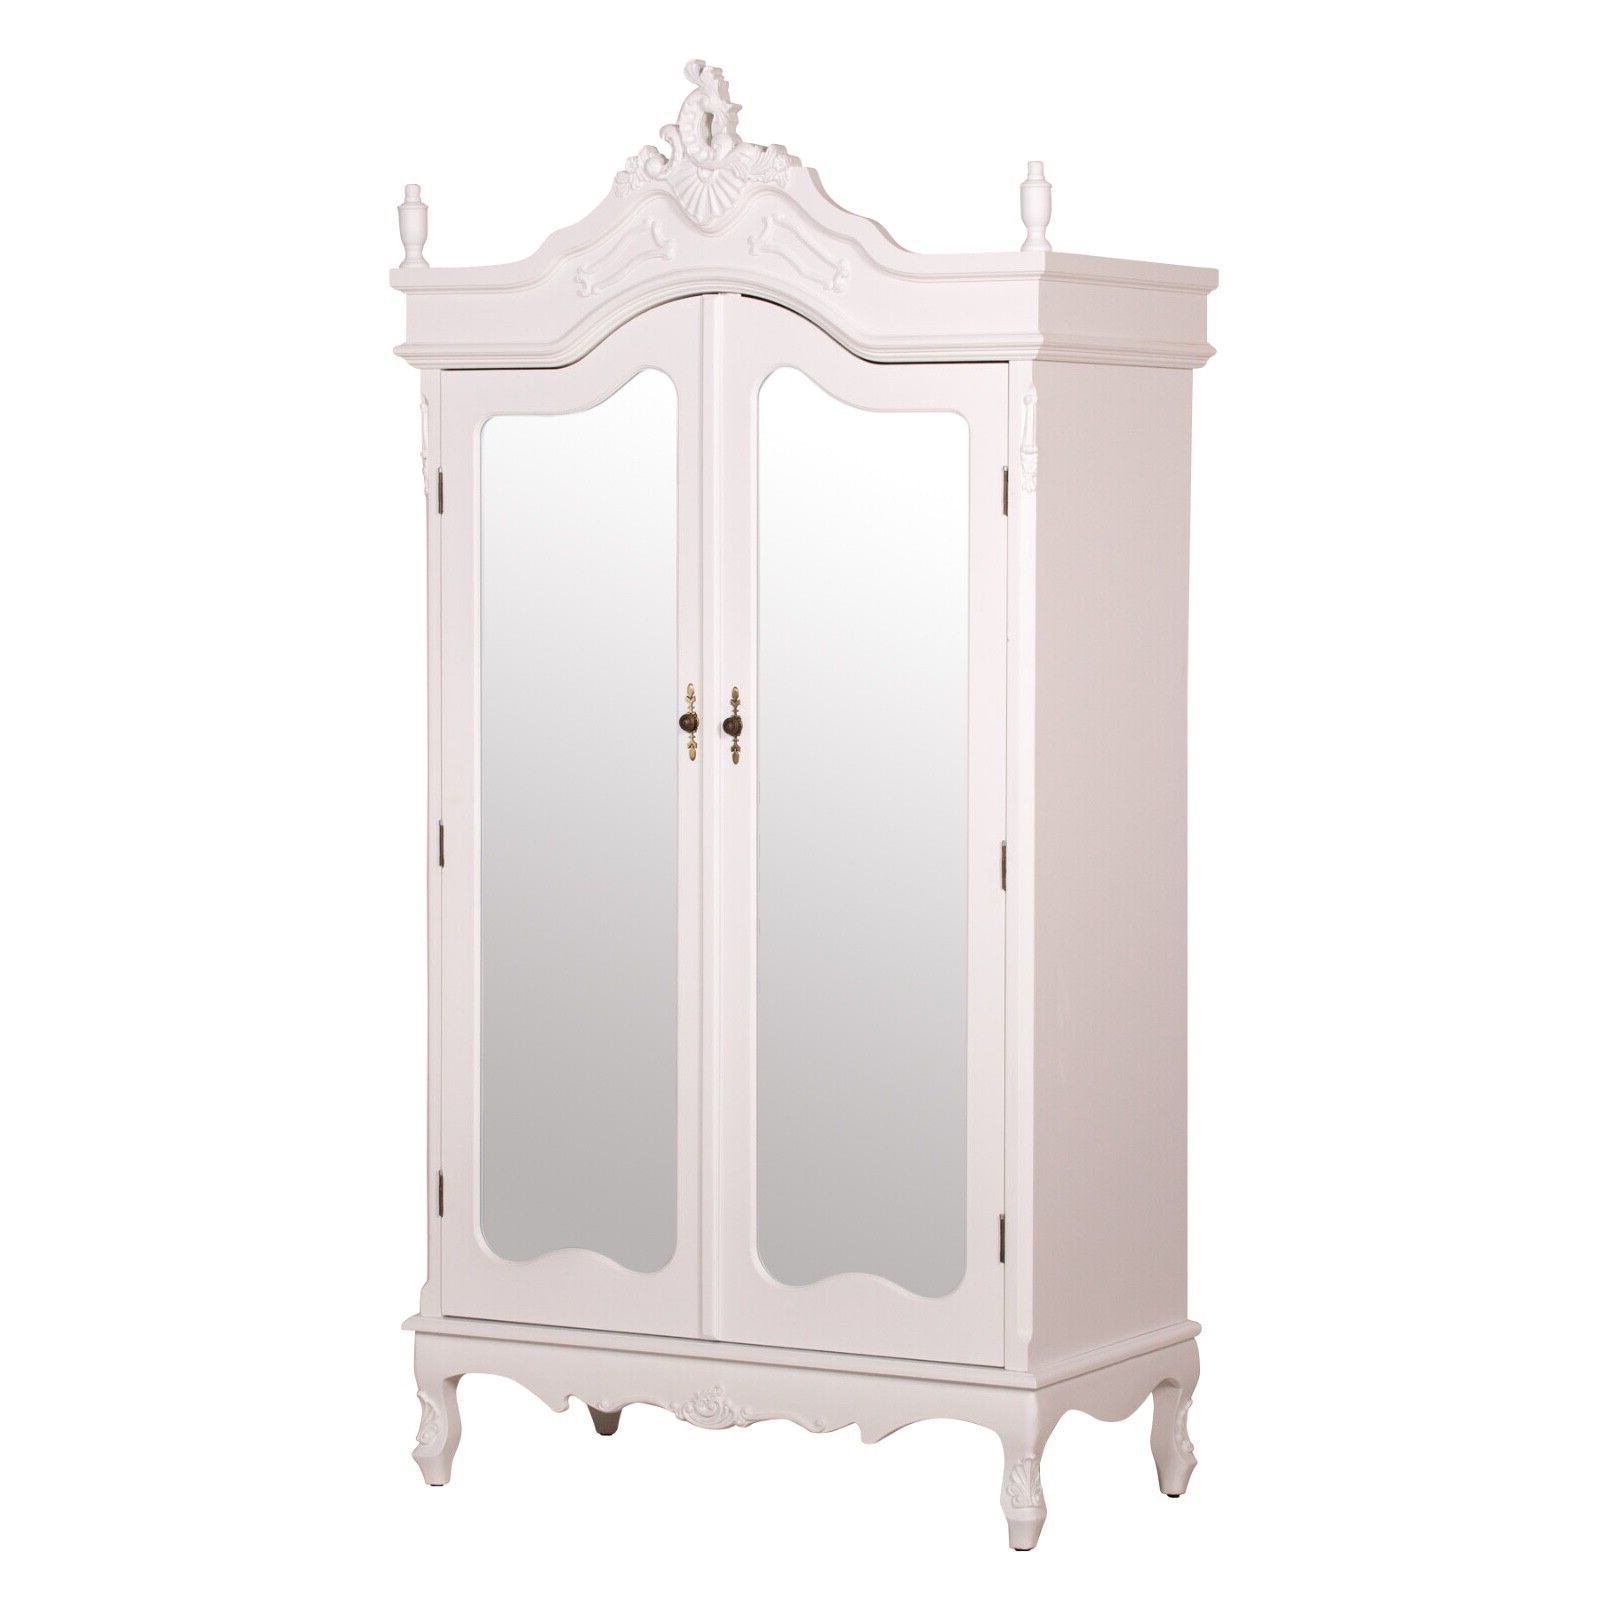 French Antique White Chateau Shabby Chic Mirrored Double Armoire Wardrobe |  Ebay For French Shabby Chic Wardrobes (View 14 of 20)